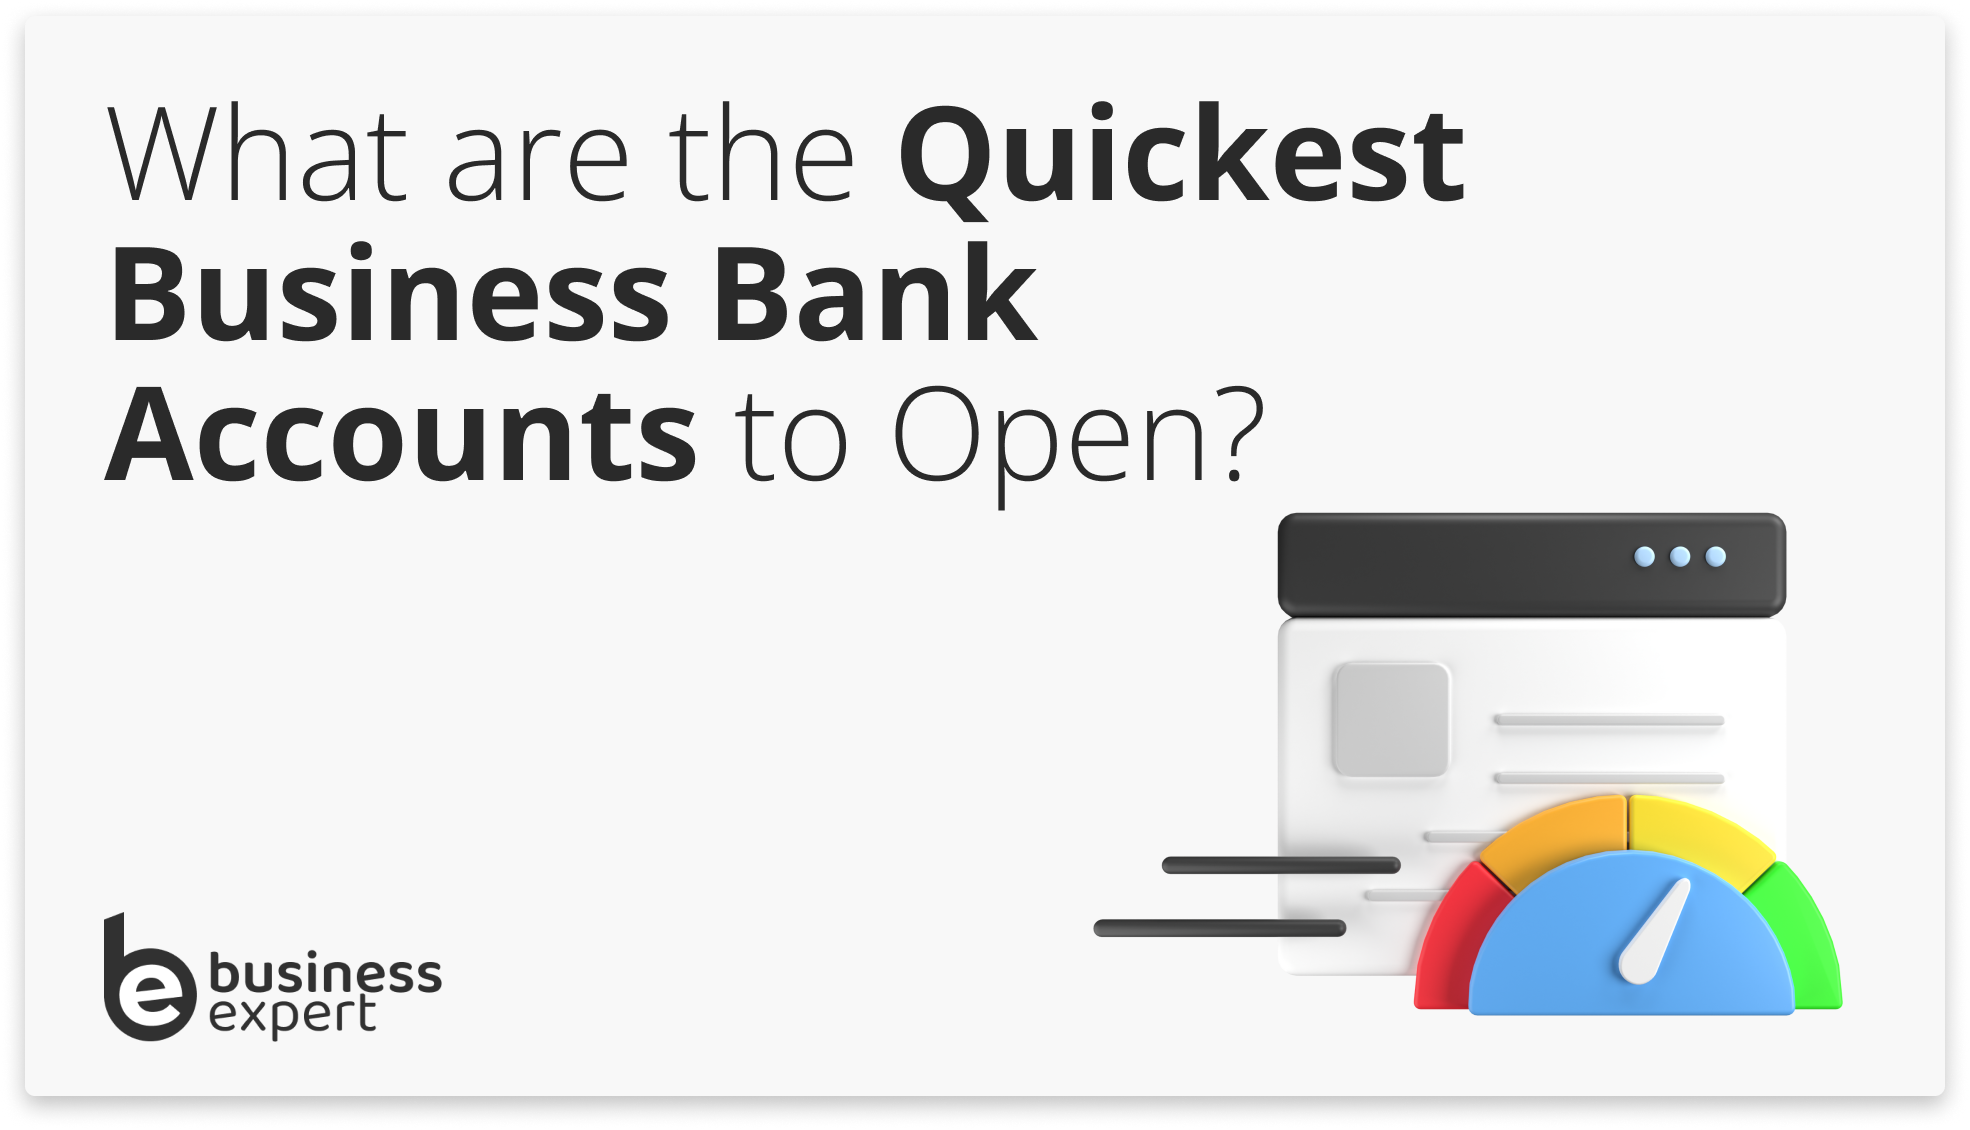 What are the Quickest Business Bank Accounts to Open?